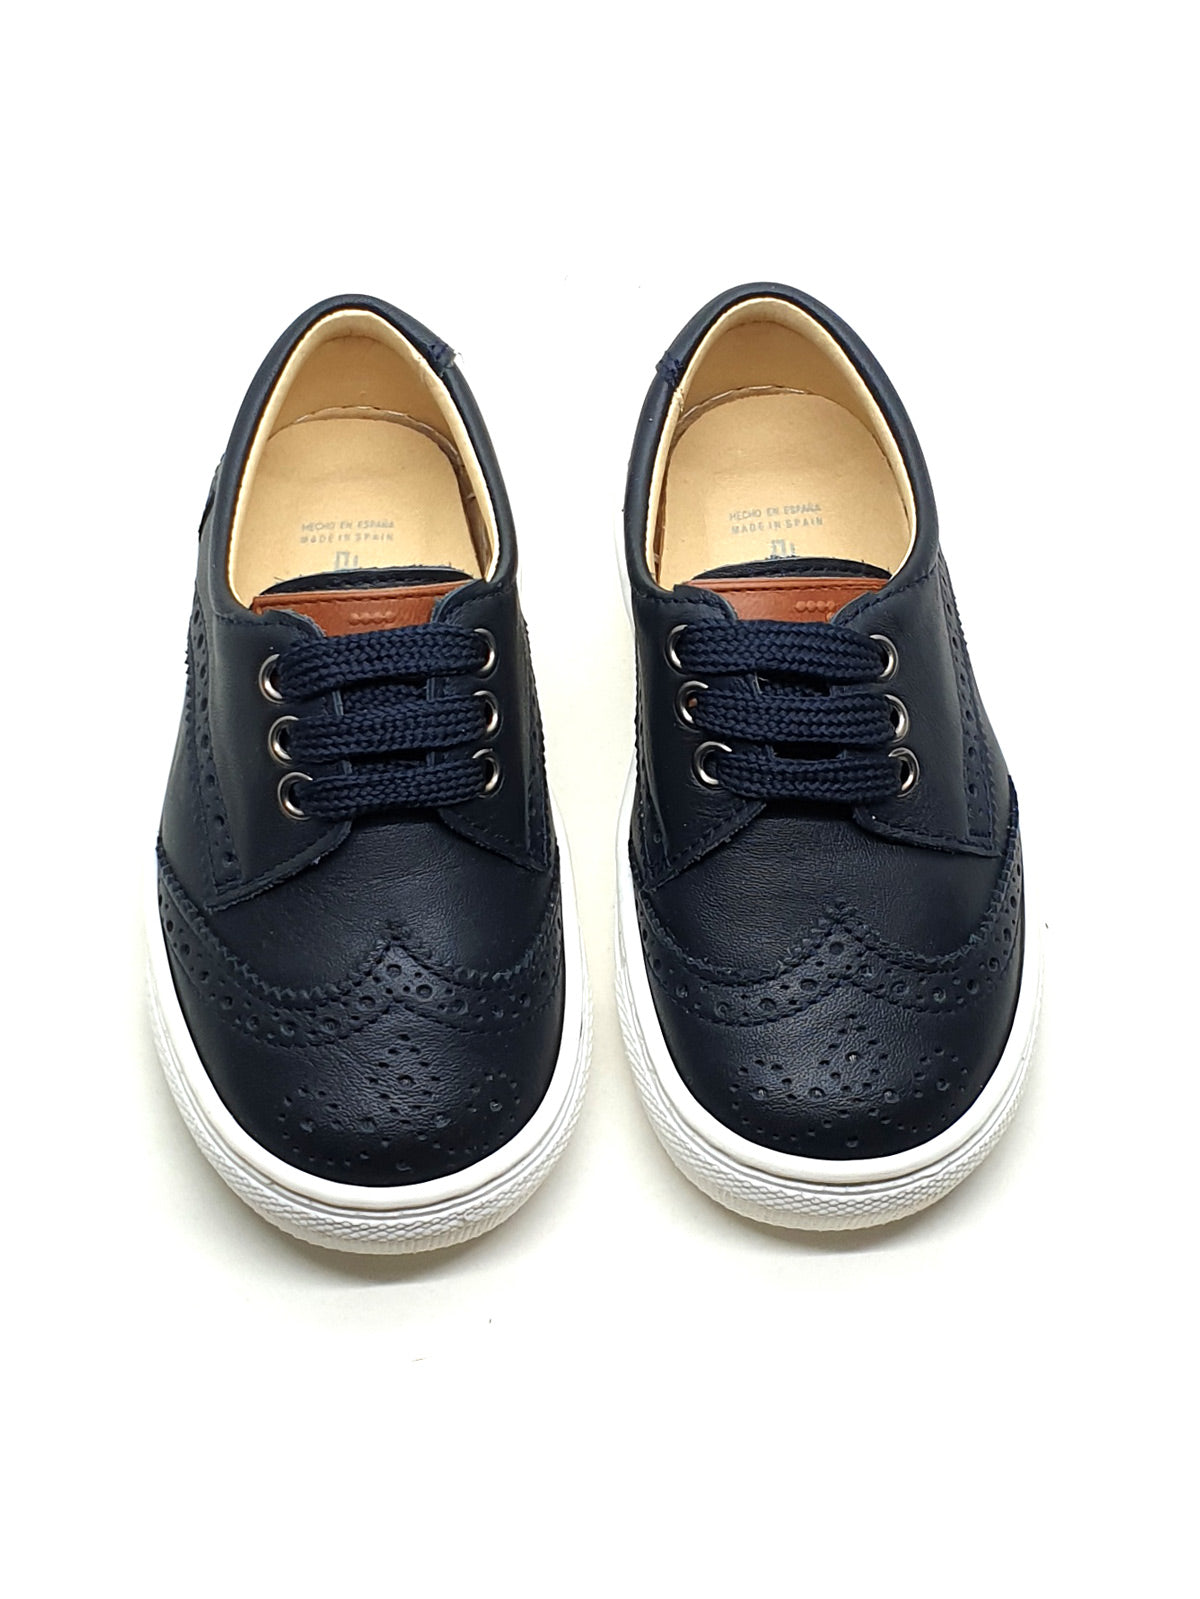 Andanines leather sneakers-navy blue